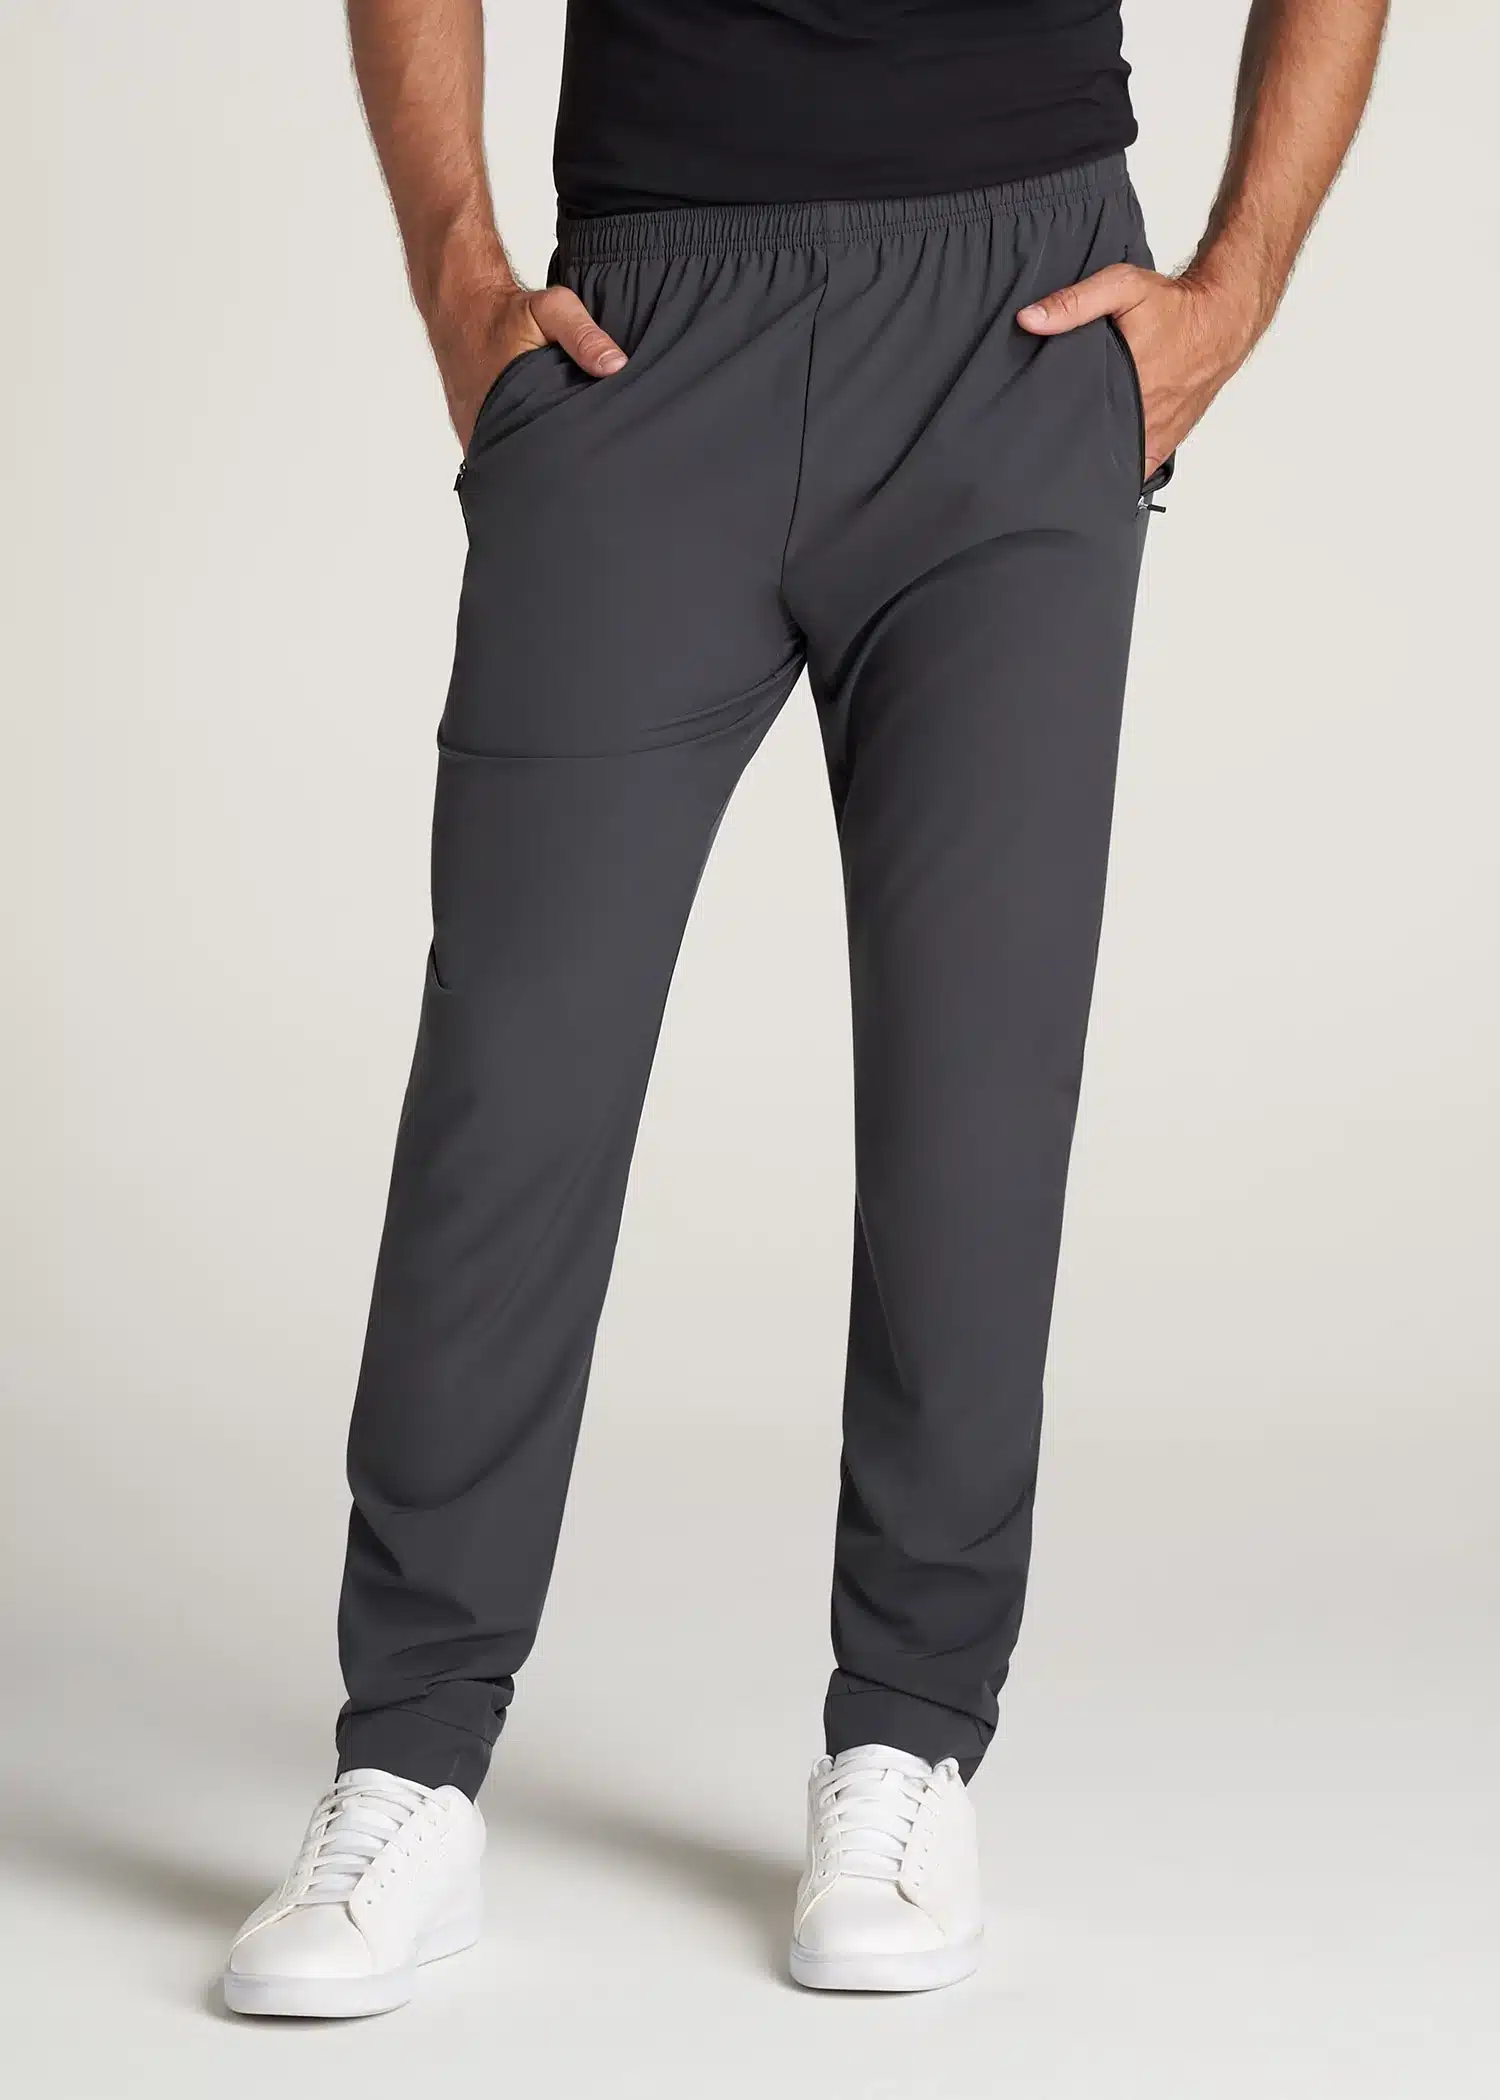 Tall Men's Slim Fit Athletic Pants: Cotton Jersey - Graphite Heather